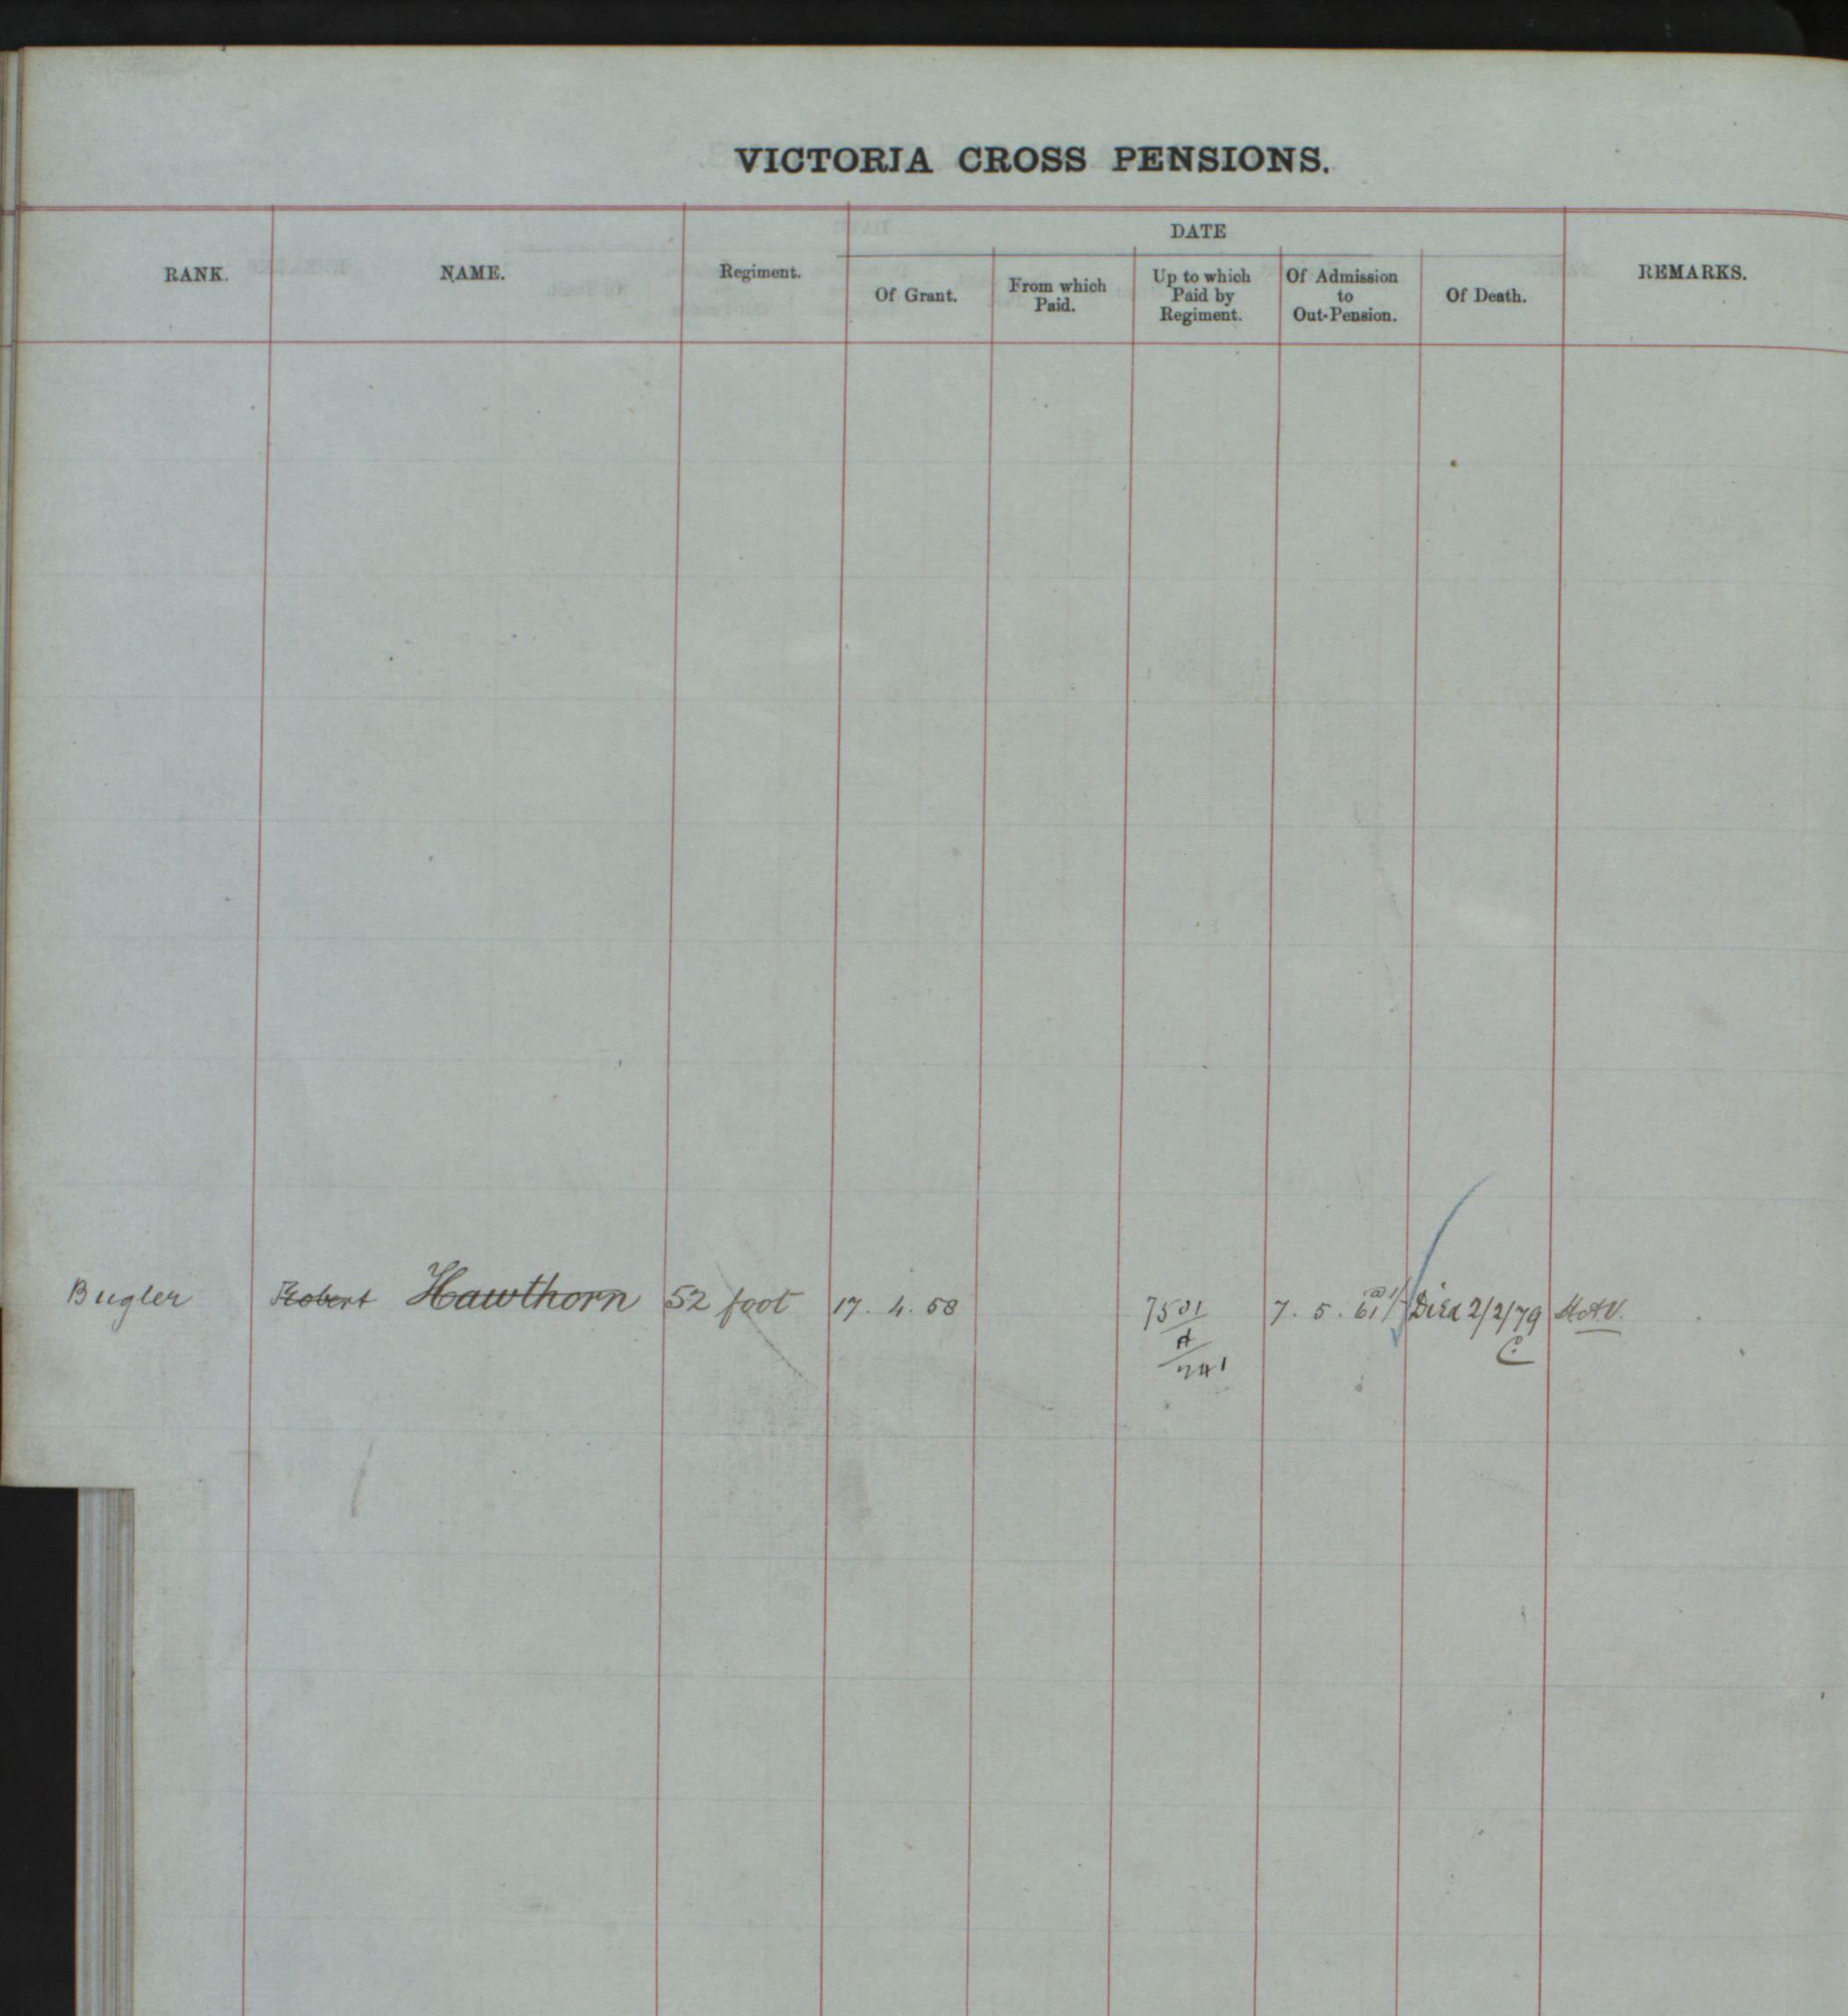 Royal Hospital Chelsea admissions books, registers and papers are in TheGenealogist’s military records